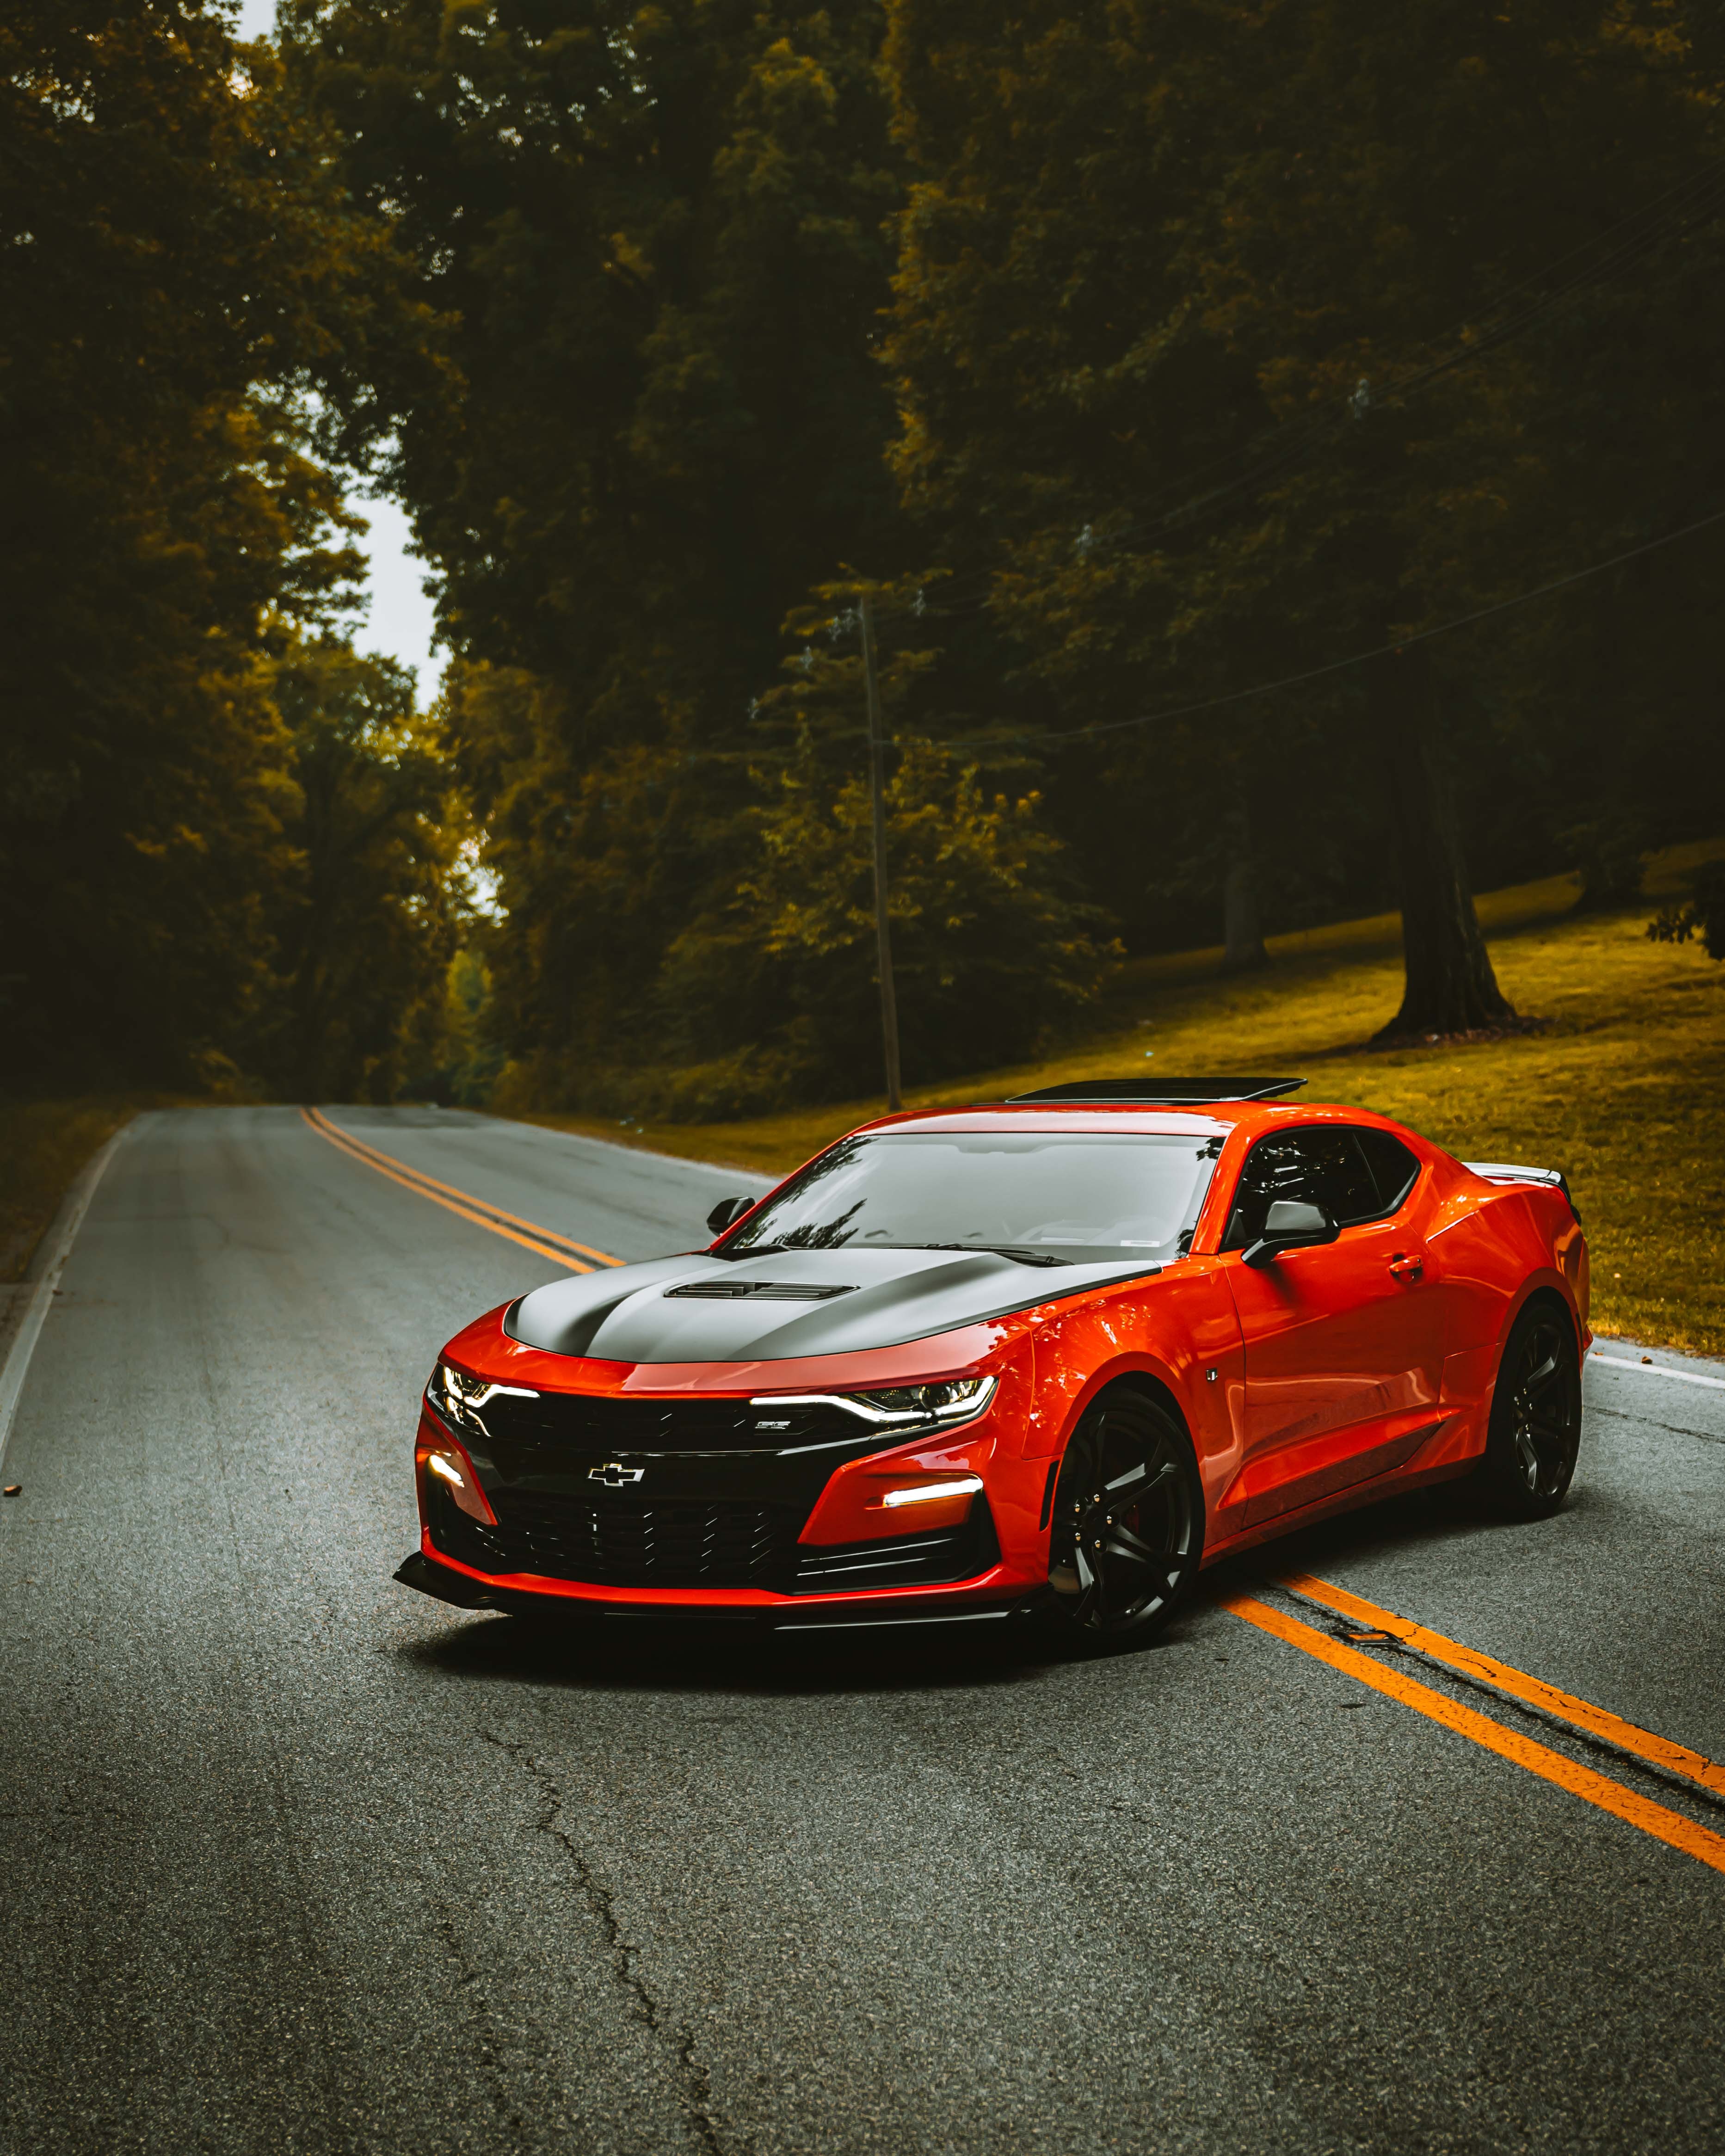 cars, chevrolet camaro, sports car, car, machine, chevrolet, sports, red, road for android